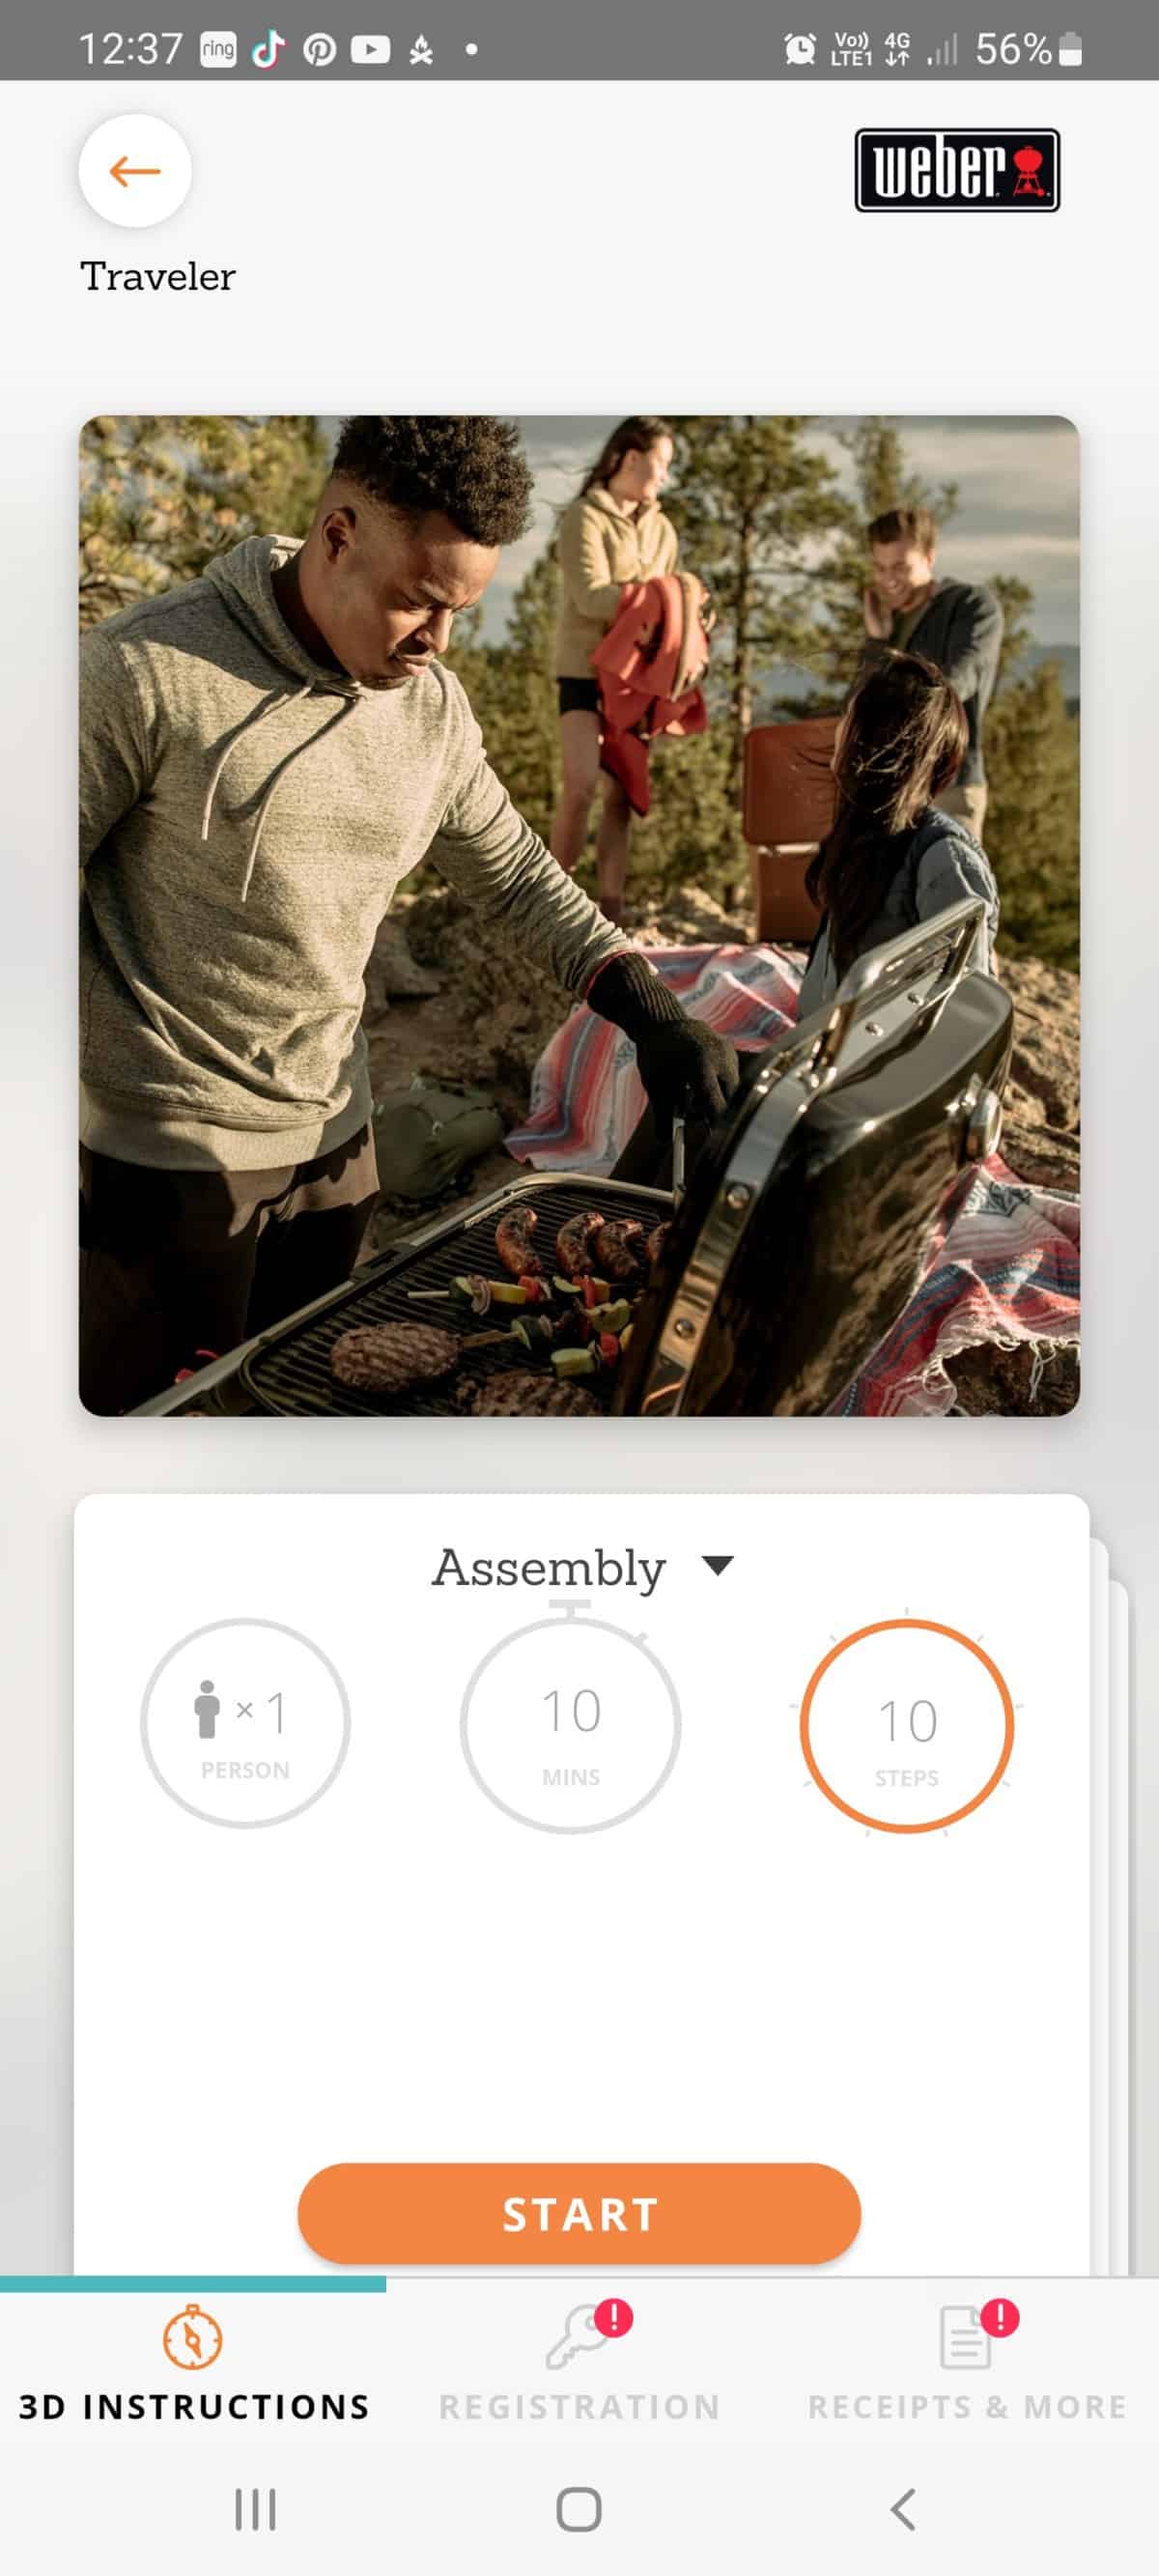 Acressnshot of Android Biltapp showing how long the Weber Traveler takes to assemble.